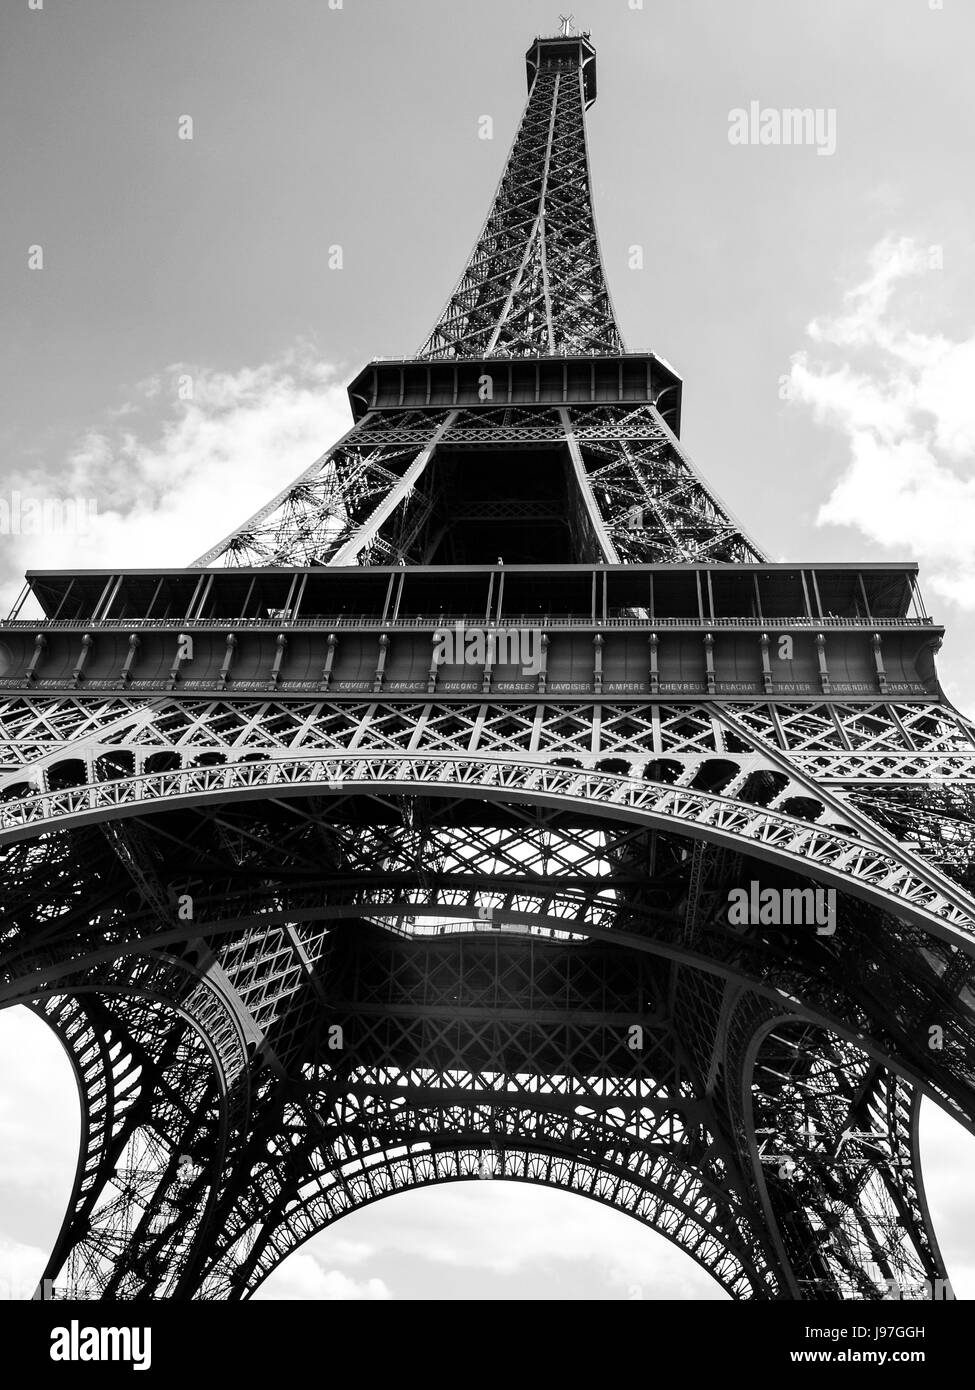 Eiffel Tower, France, from the front. Partial upward view of the eiffel tower. Stock Photo